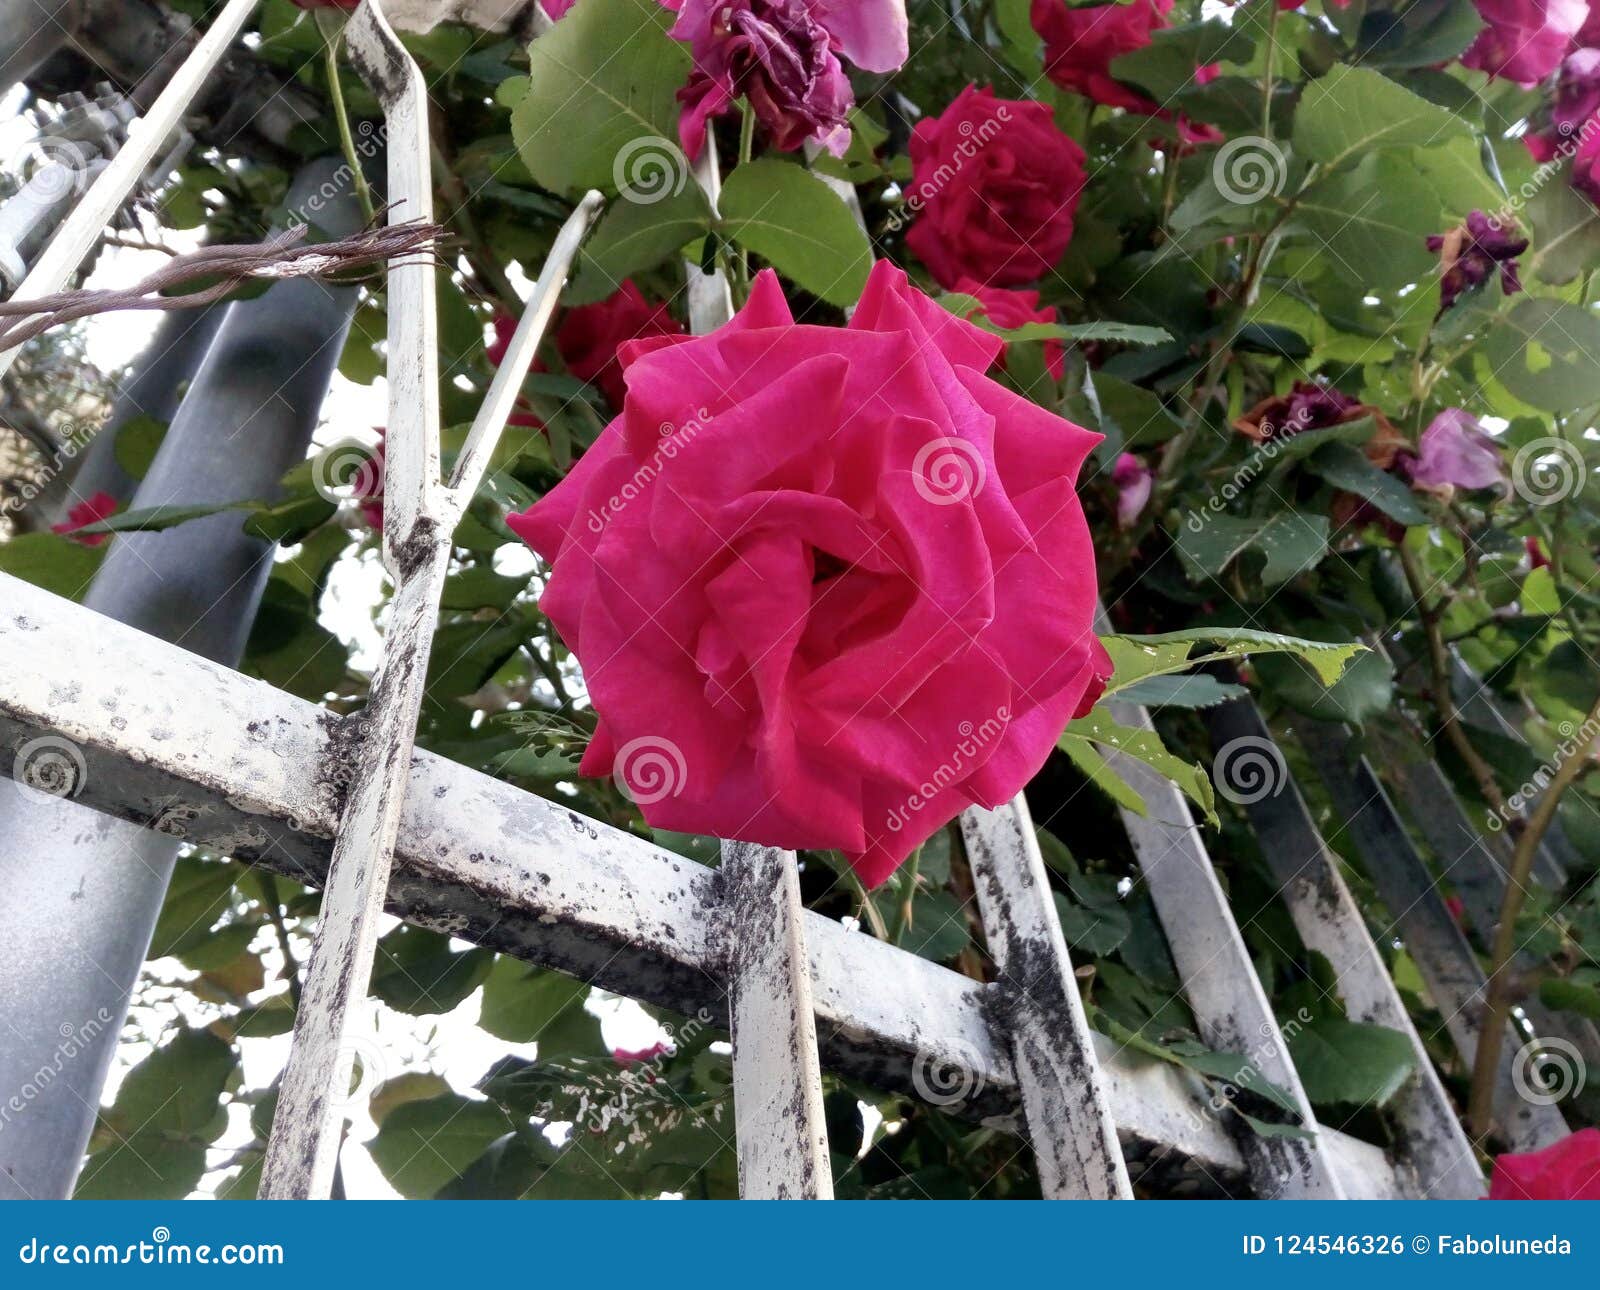 lookin` up from the ground to a beautiful opened pink rose!